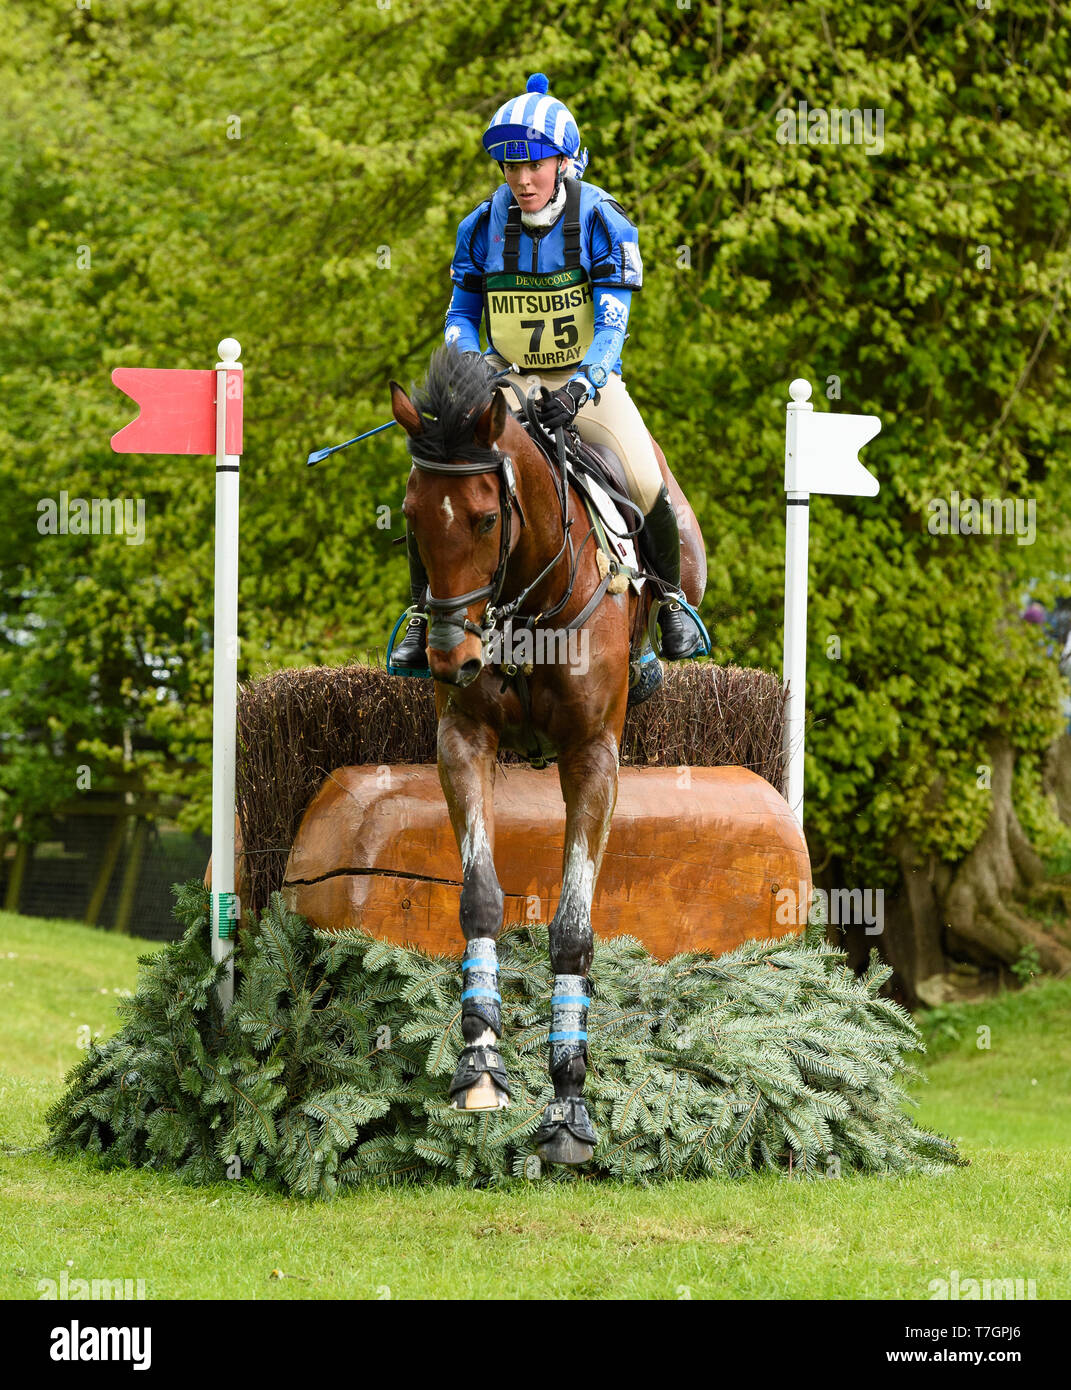 Imogen Murray and IVAR GOODEN during the cross country phase of the Mitsubishi Motors Badminton Horse Trials, May 2019 Stock Photo